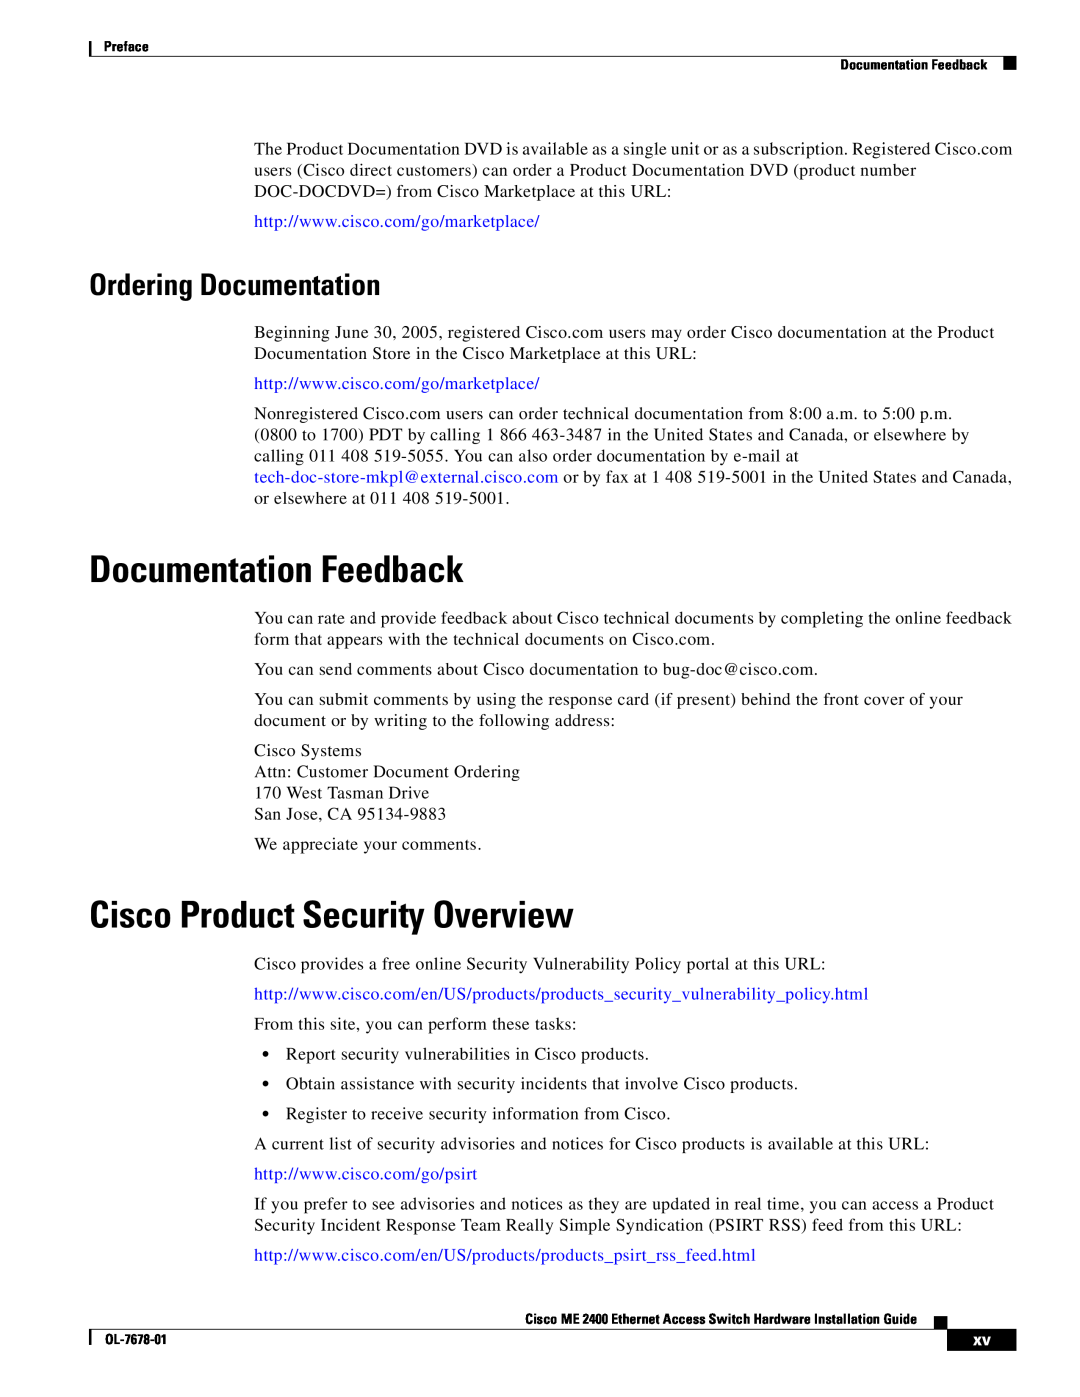 Cisco Systems ME 2400 manual Documentation Feedback, Cisco Product Security Overview, Ordering Documentation 